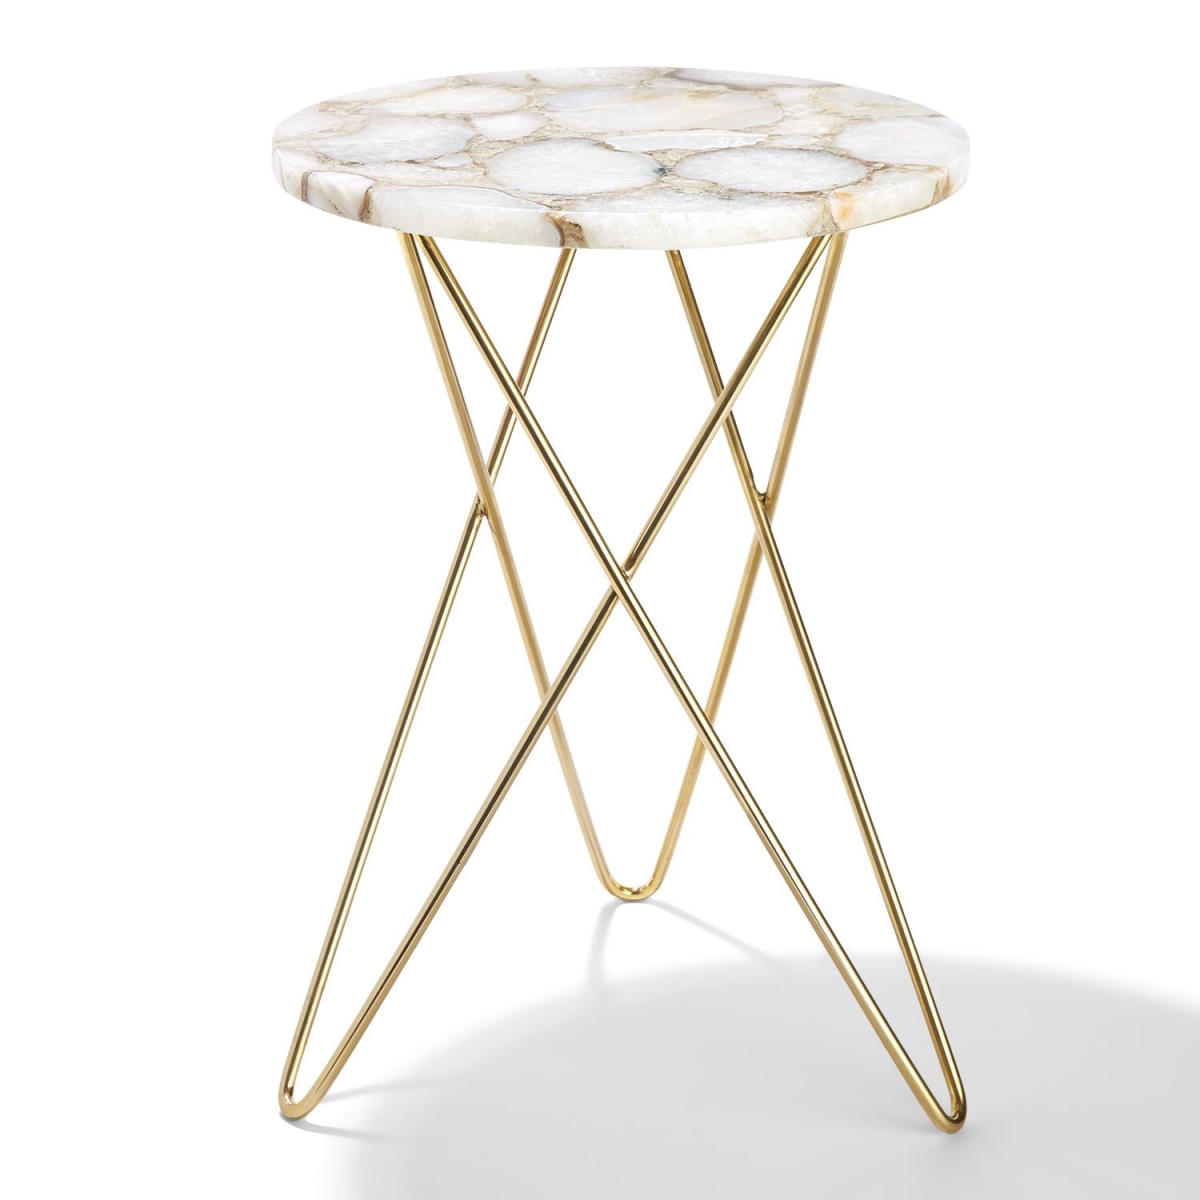 Saa005-wh White Agate Table With Steel Base